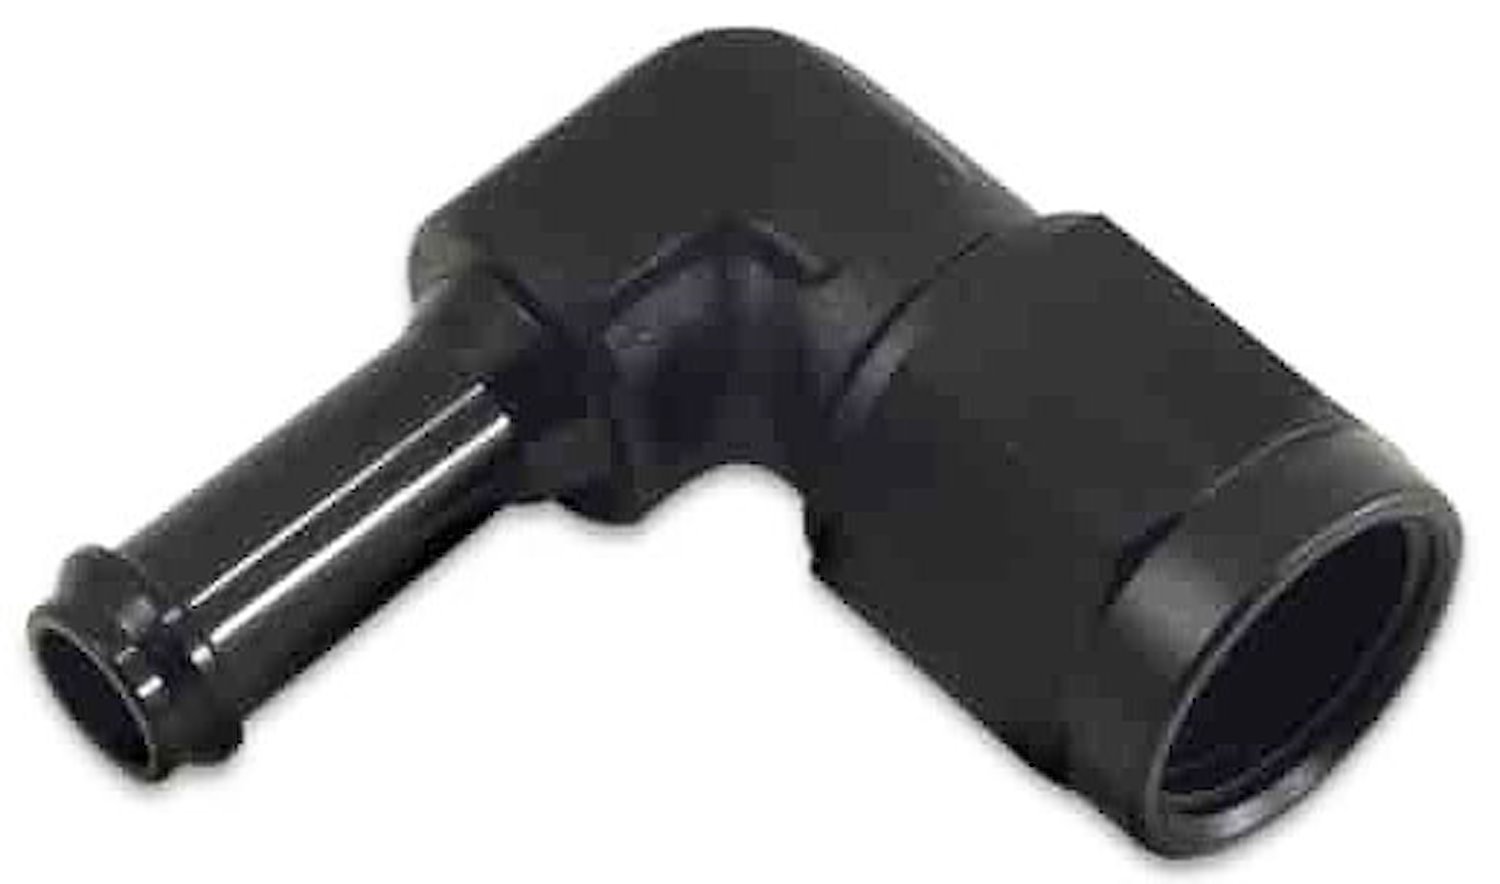 90 Degree AN Female to Barb Adapter Fitting [-8 AN Female to 3/8 in. Barb, Black]